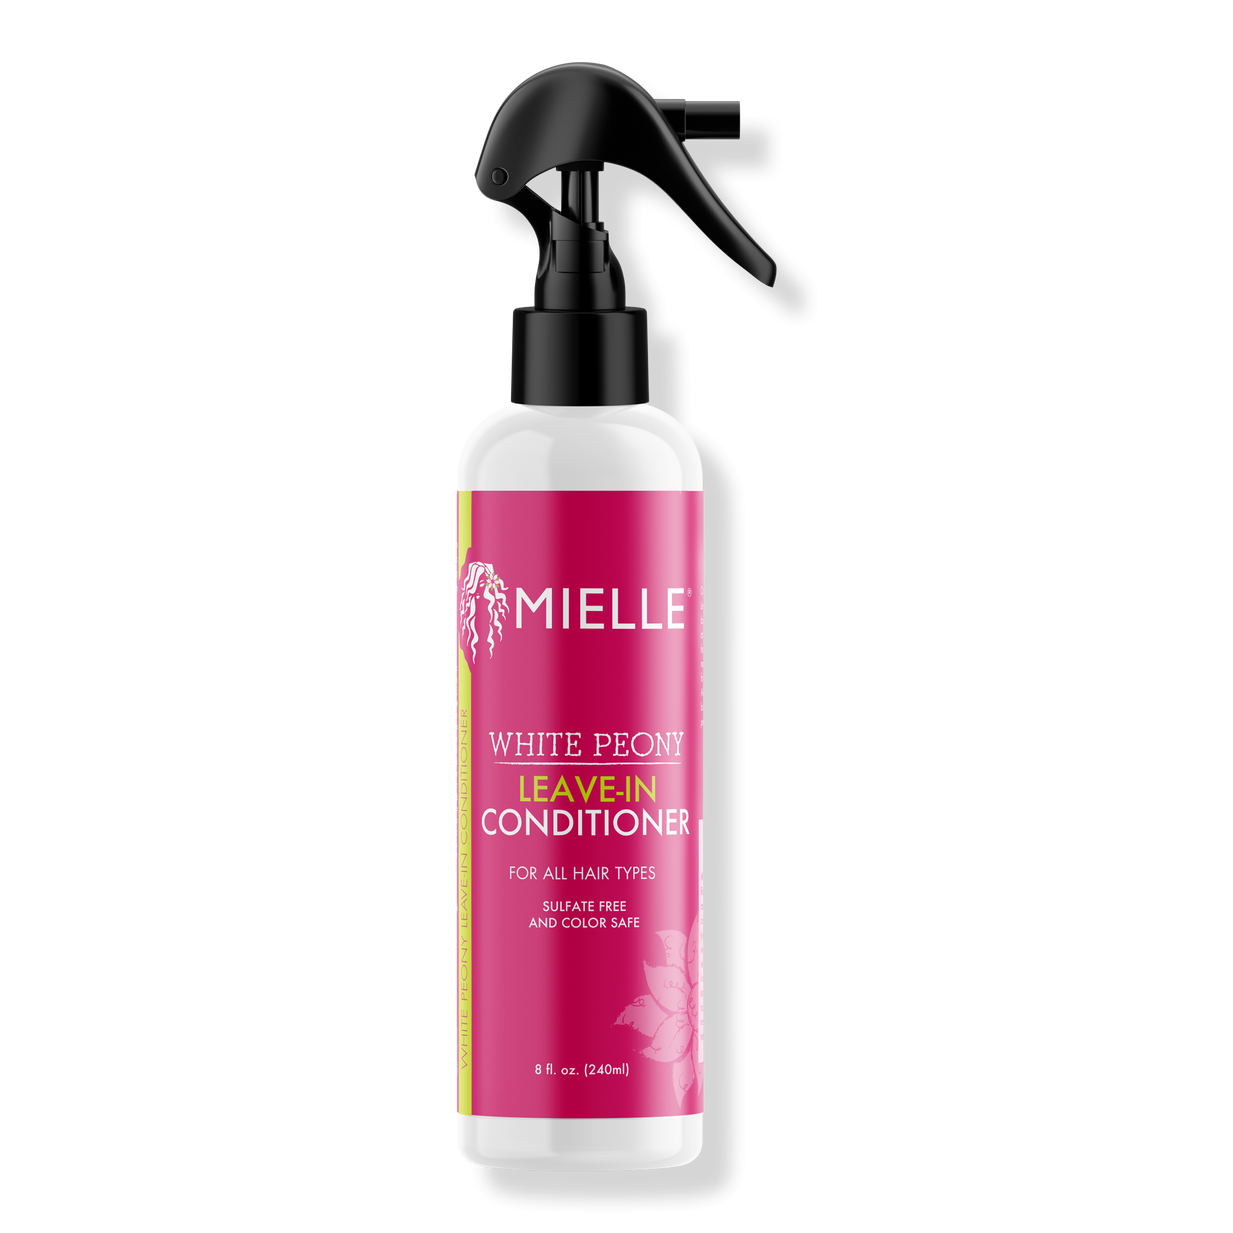 7 Mielle Products That Work Well On Relaxed Hair